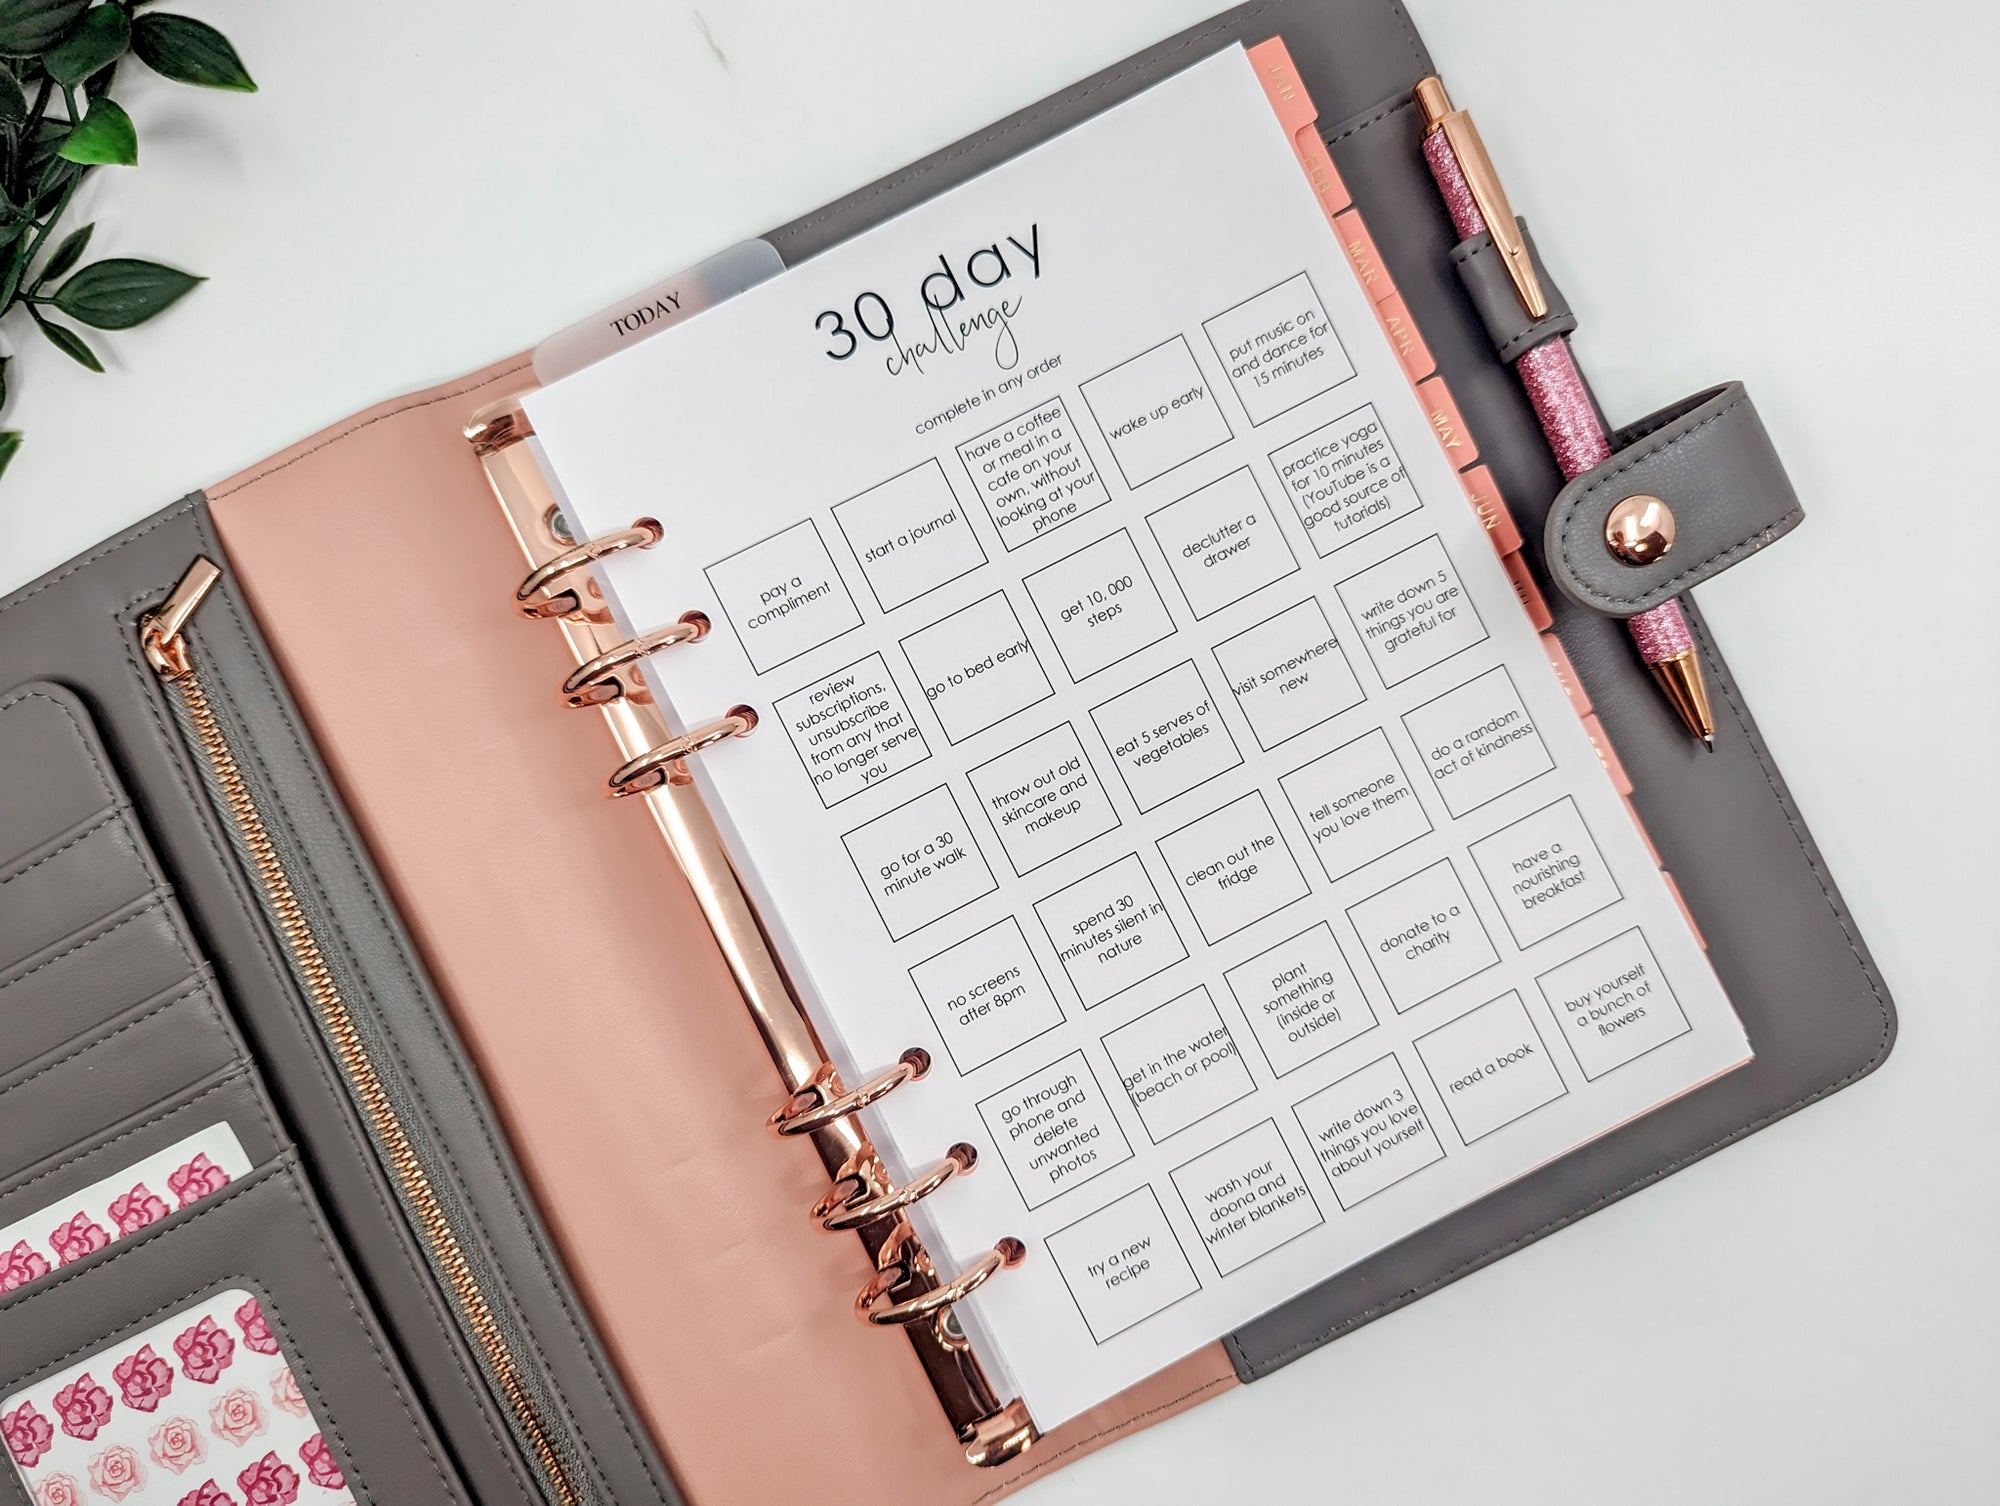 30 day challenge planner inserts for A5 ring planners